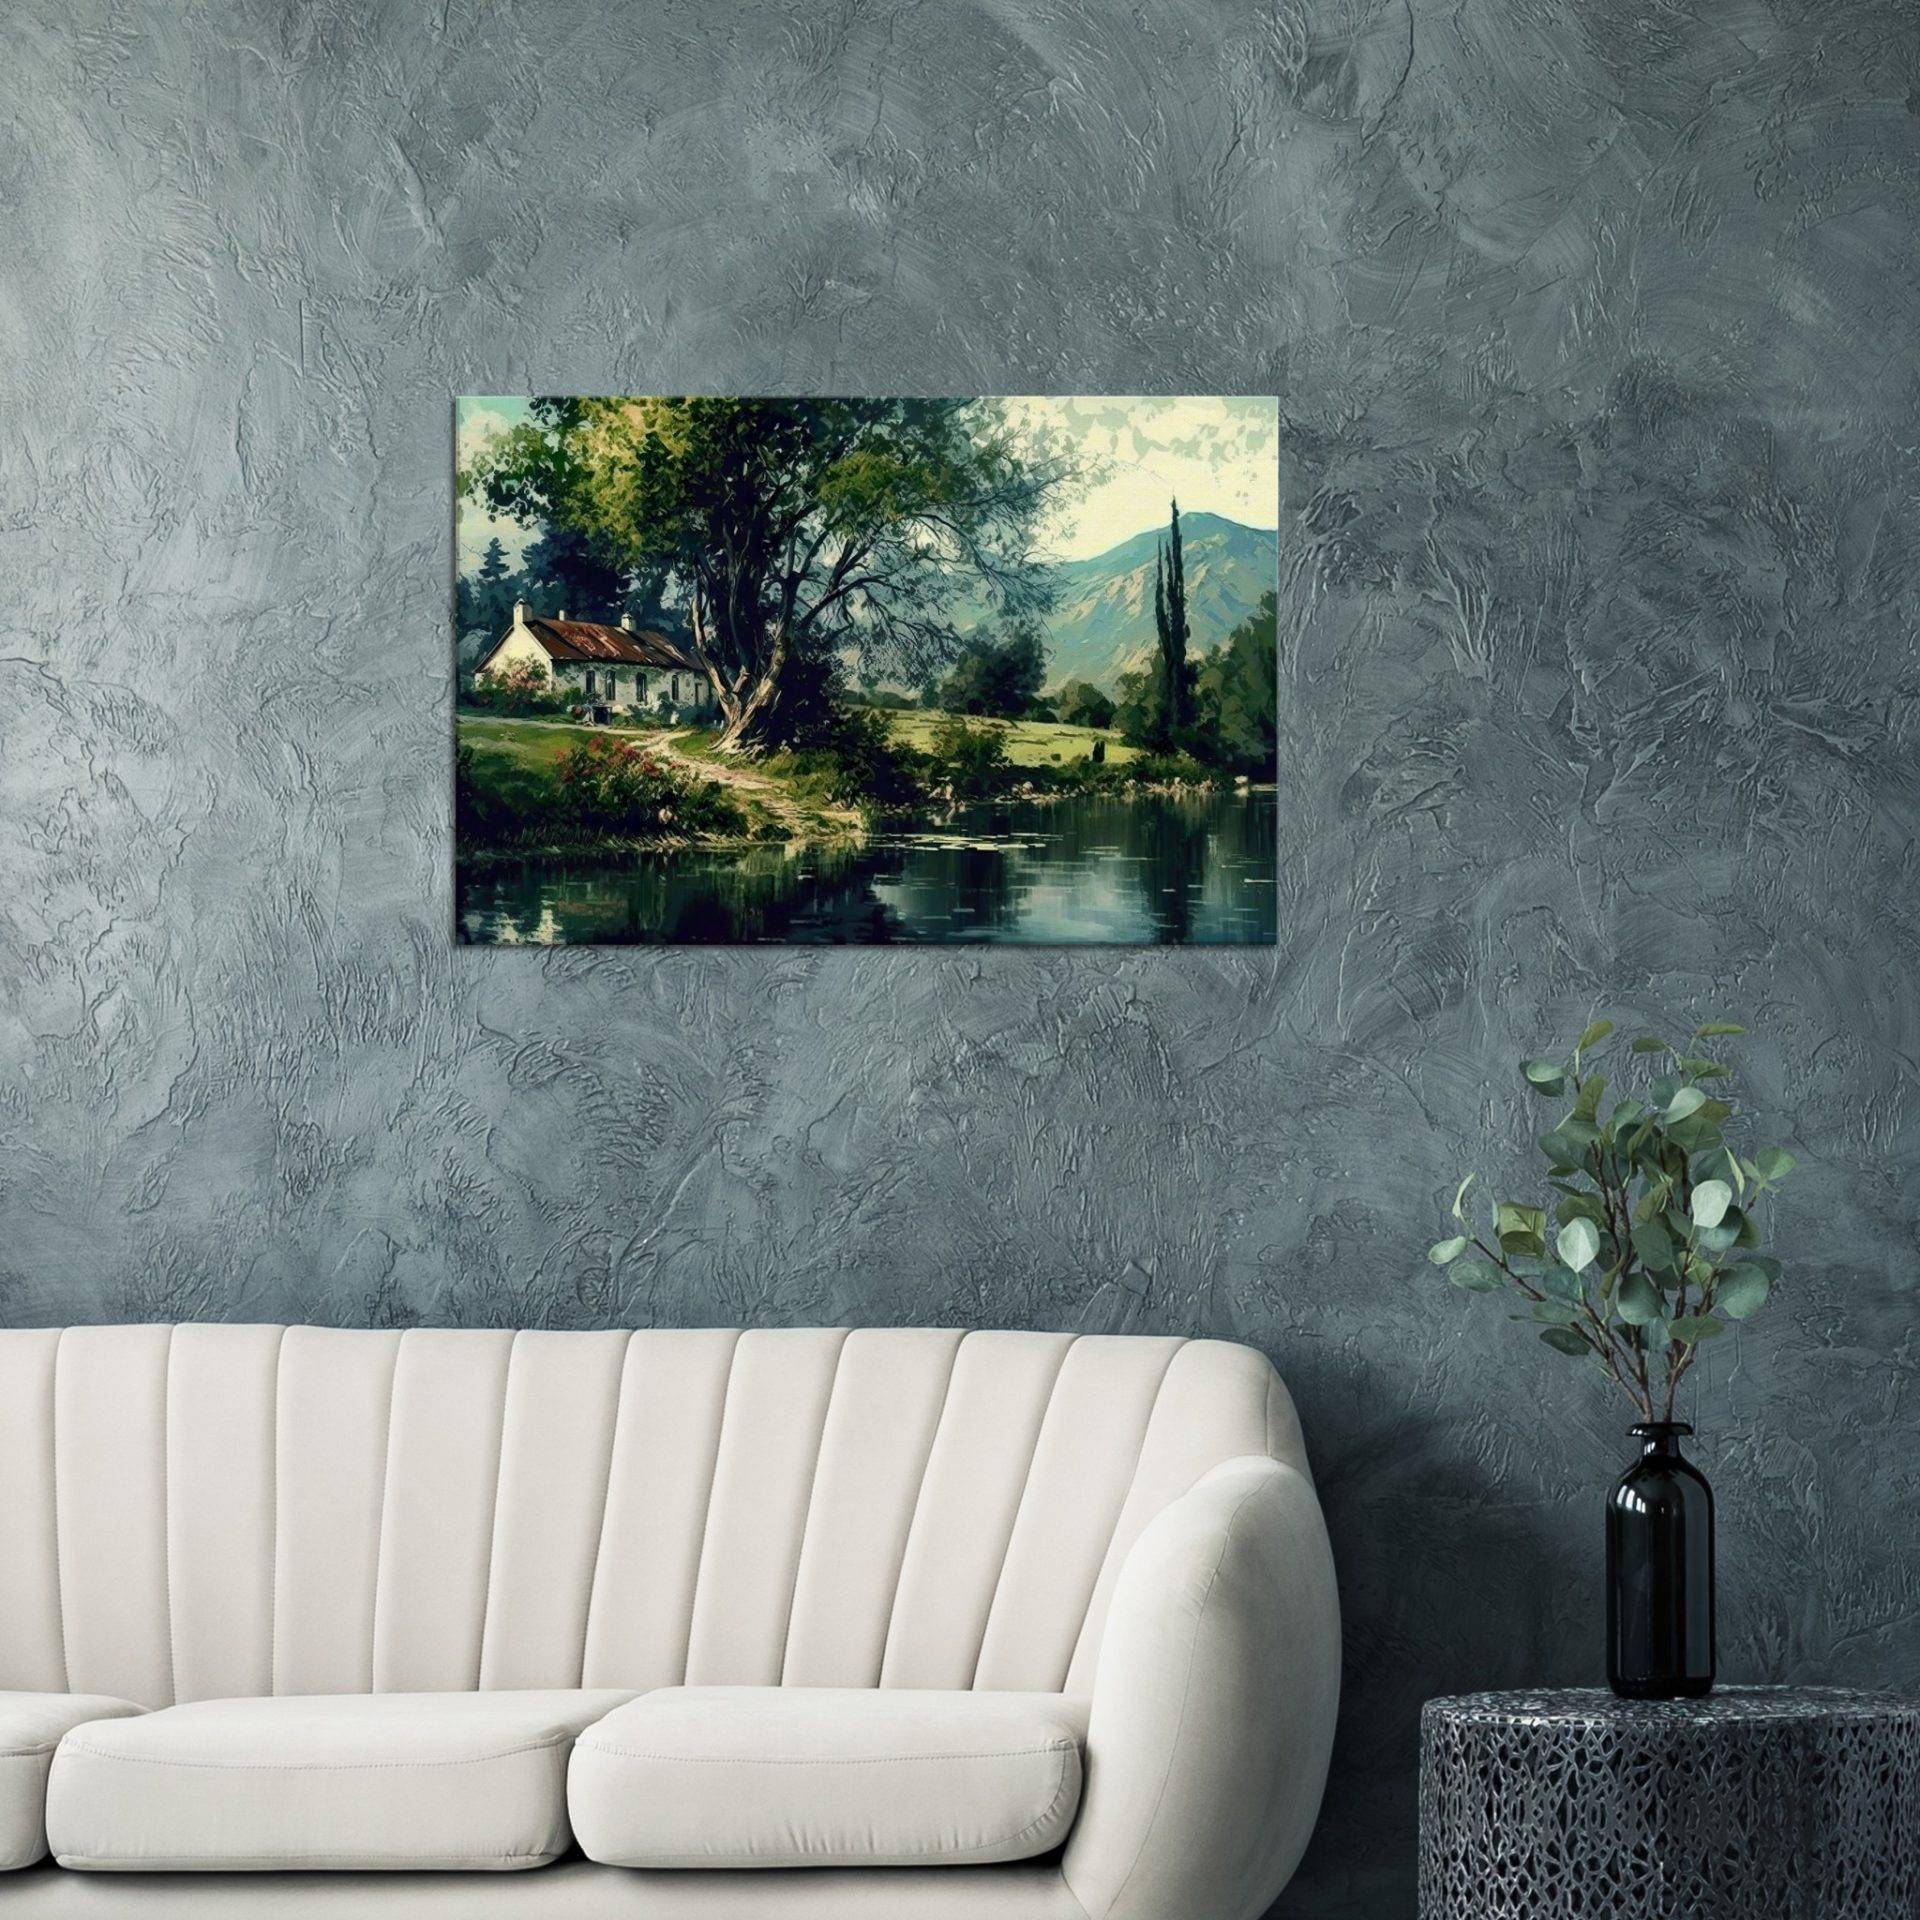 Tessin Landscape 4 (Canvas Print) Fabled Gallery https://fabledgallery.art/?post_type=product&p=37110